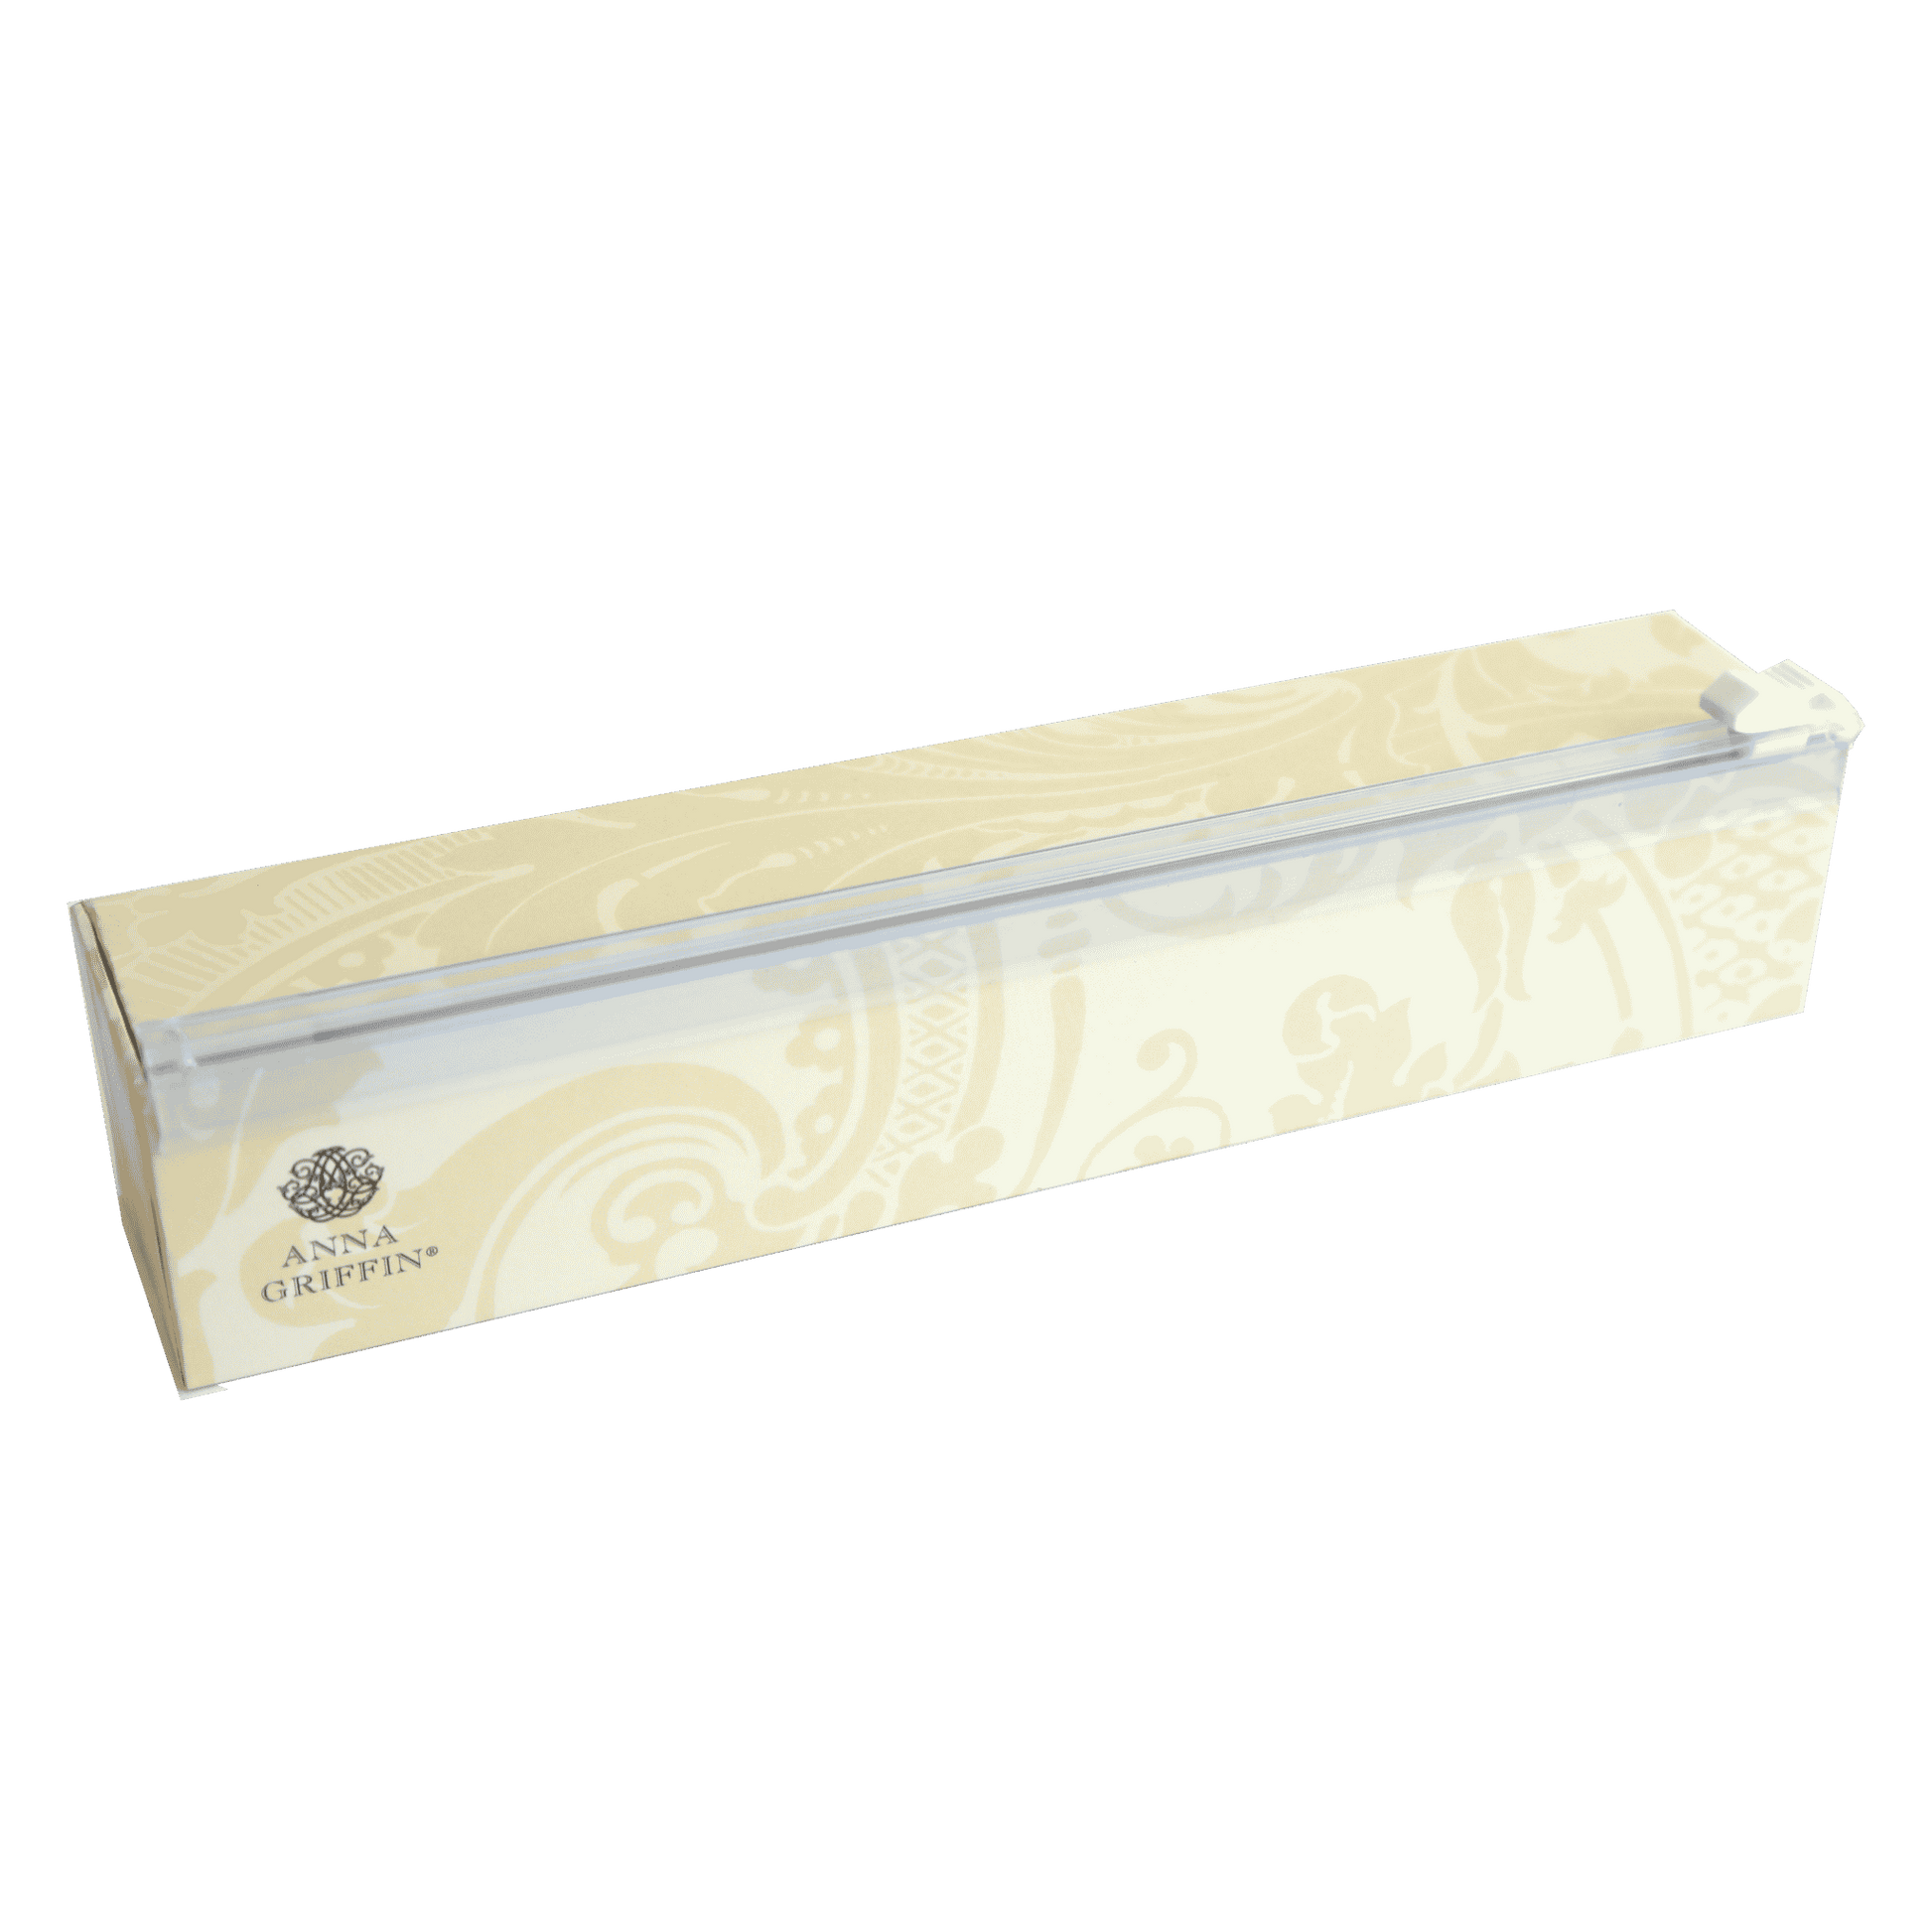 Anna Griffin Wax Paper Roll with Box Trimmer